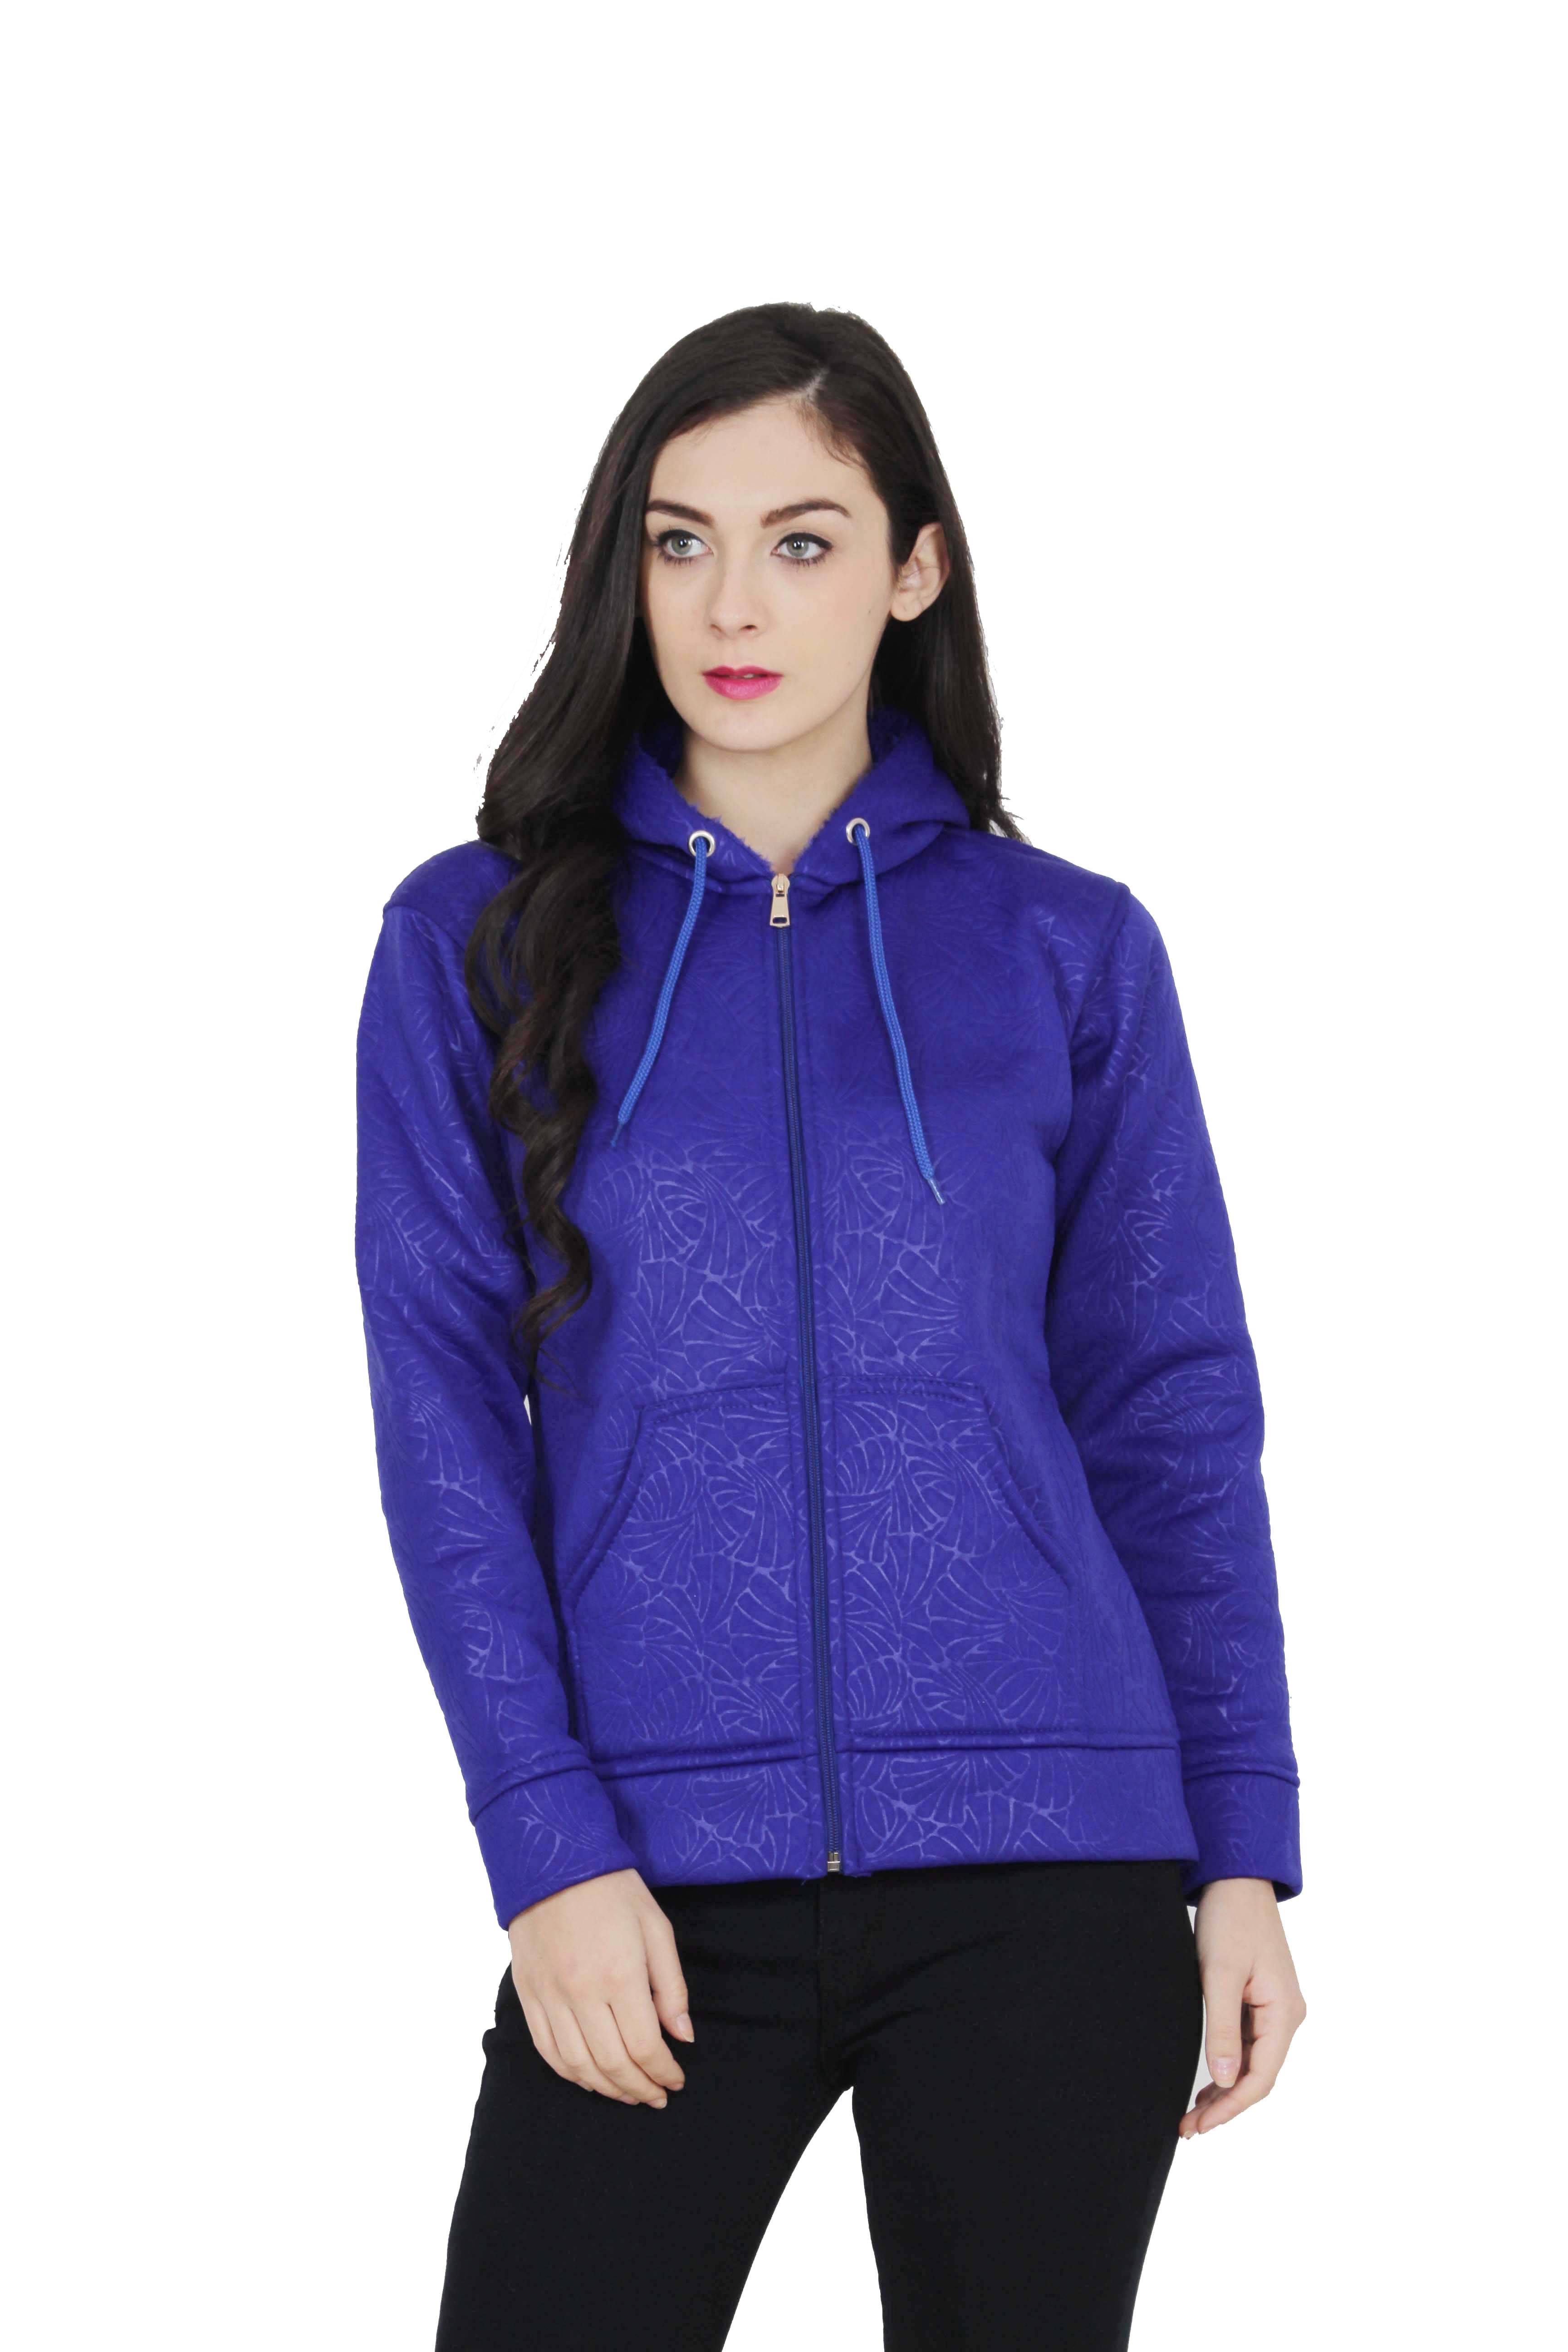 Buy Bona Blue Lycra Jackets For Womens Online @ ₹799 from ShopClues